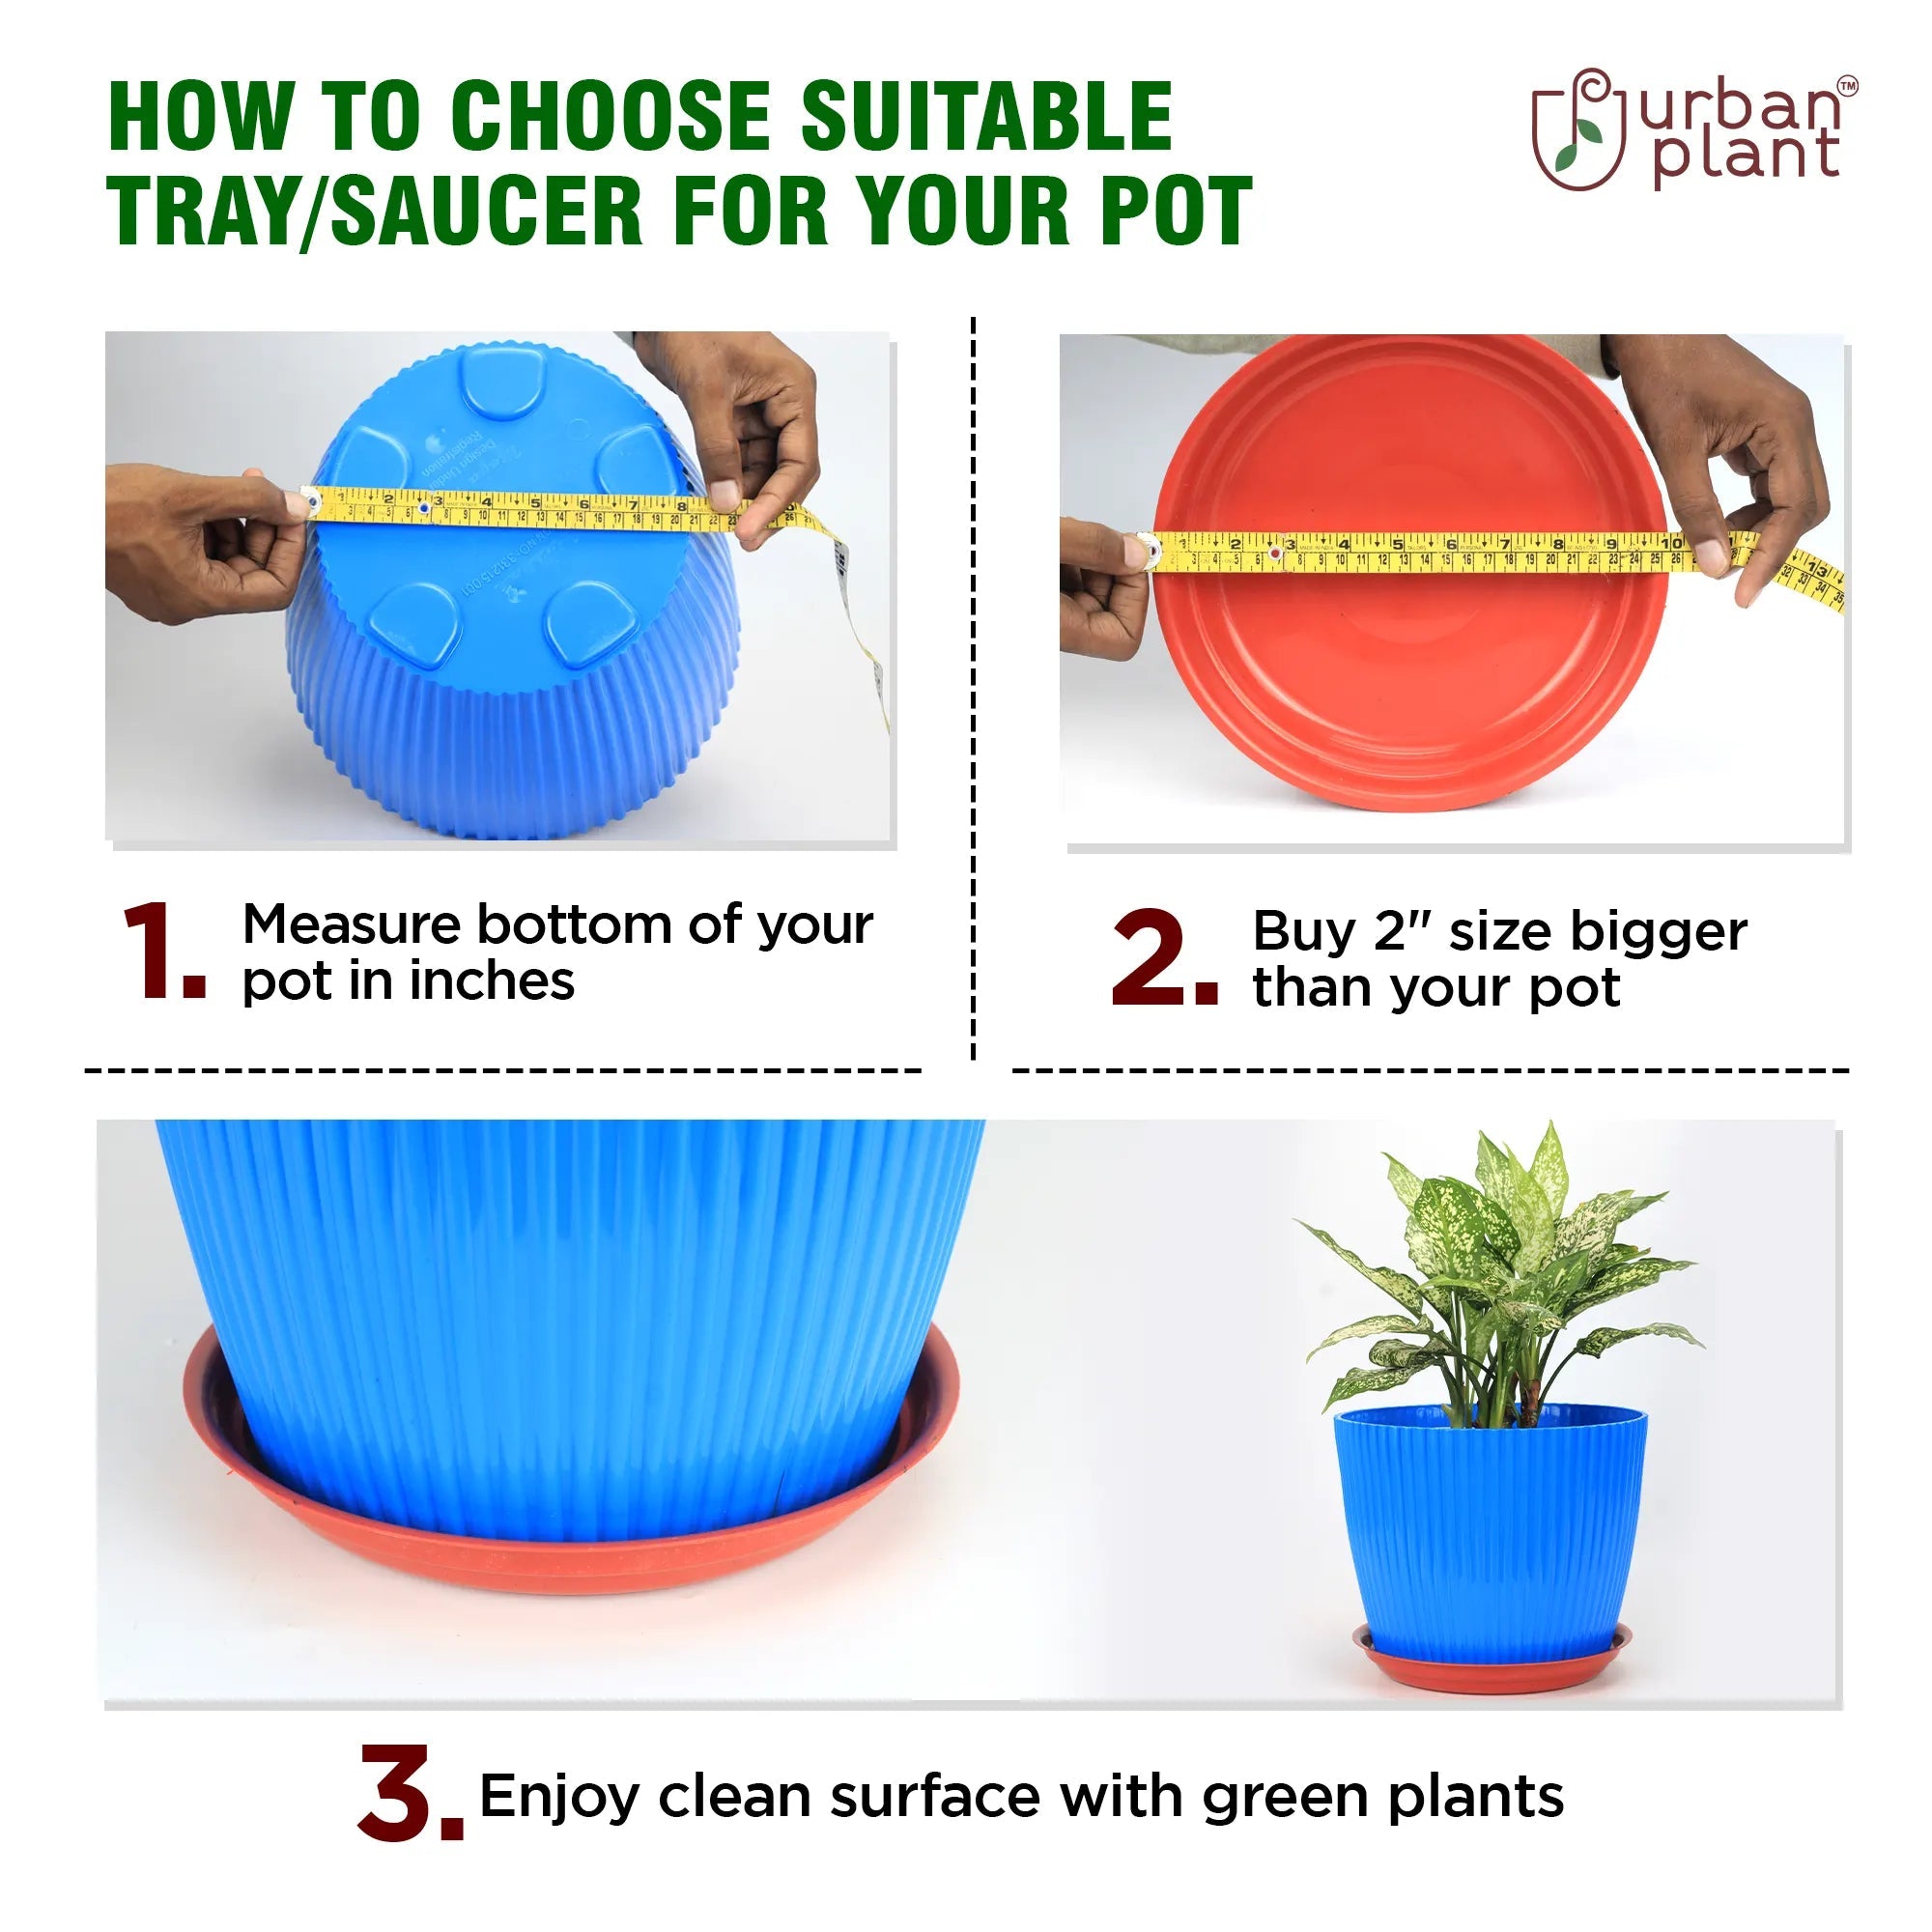 Urban Plant Round Bottom Tray (Plate/Saucer) for All Type of Pots Urban Plant 